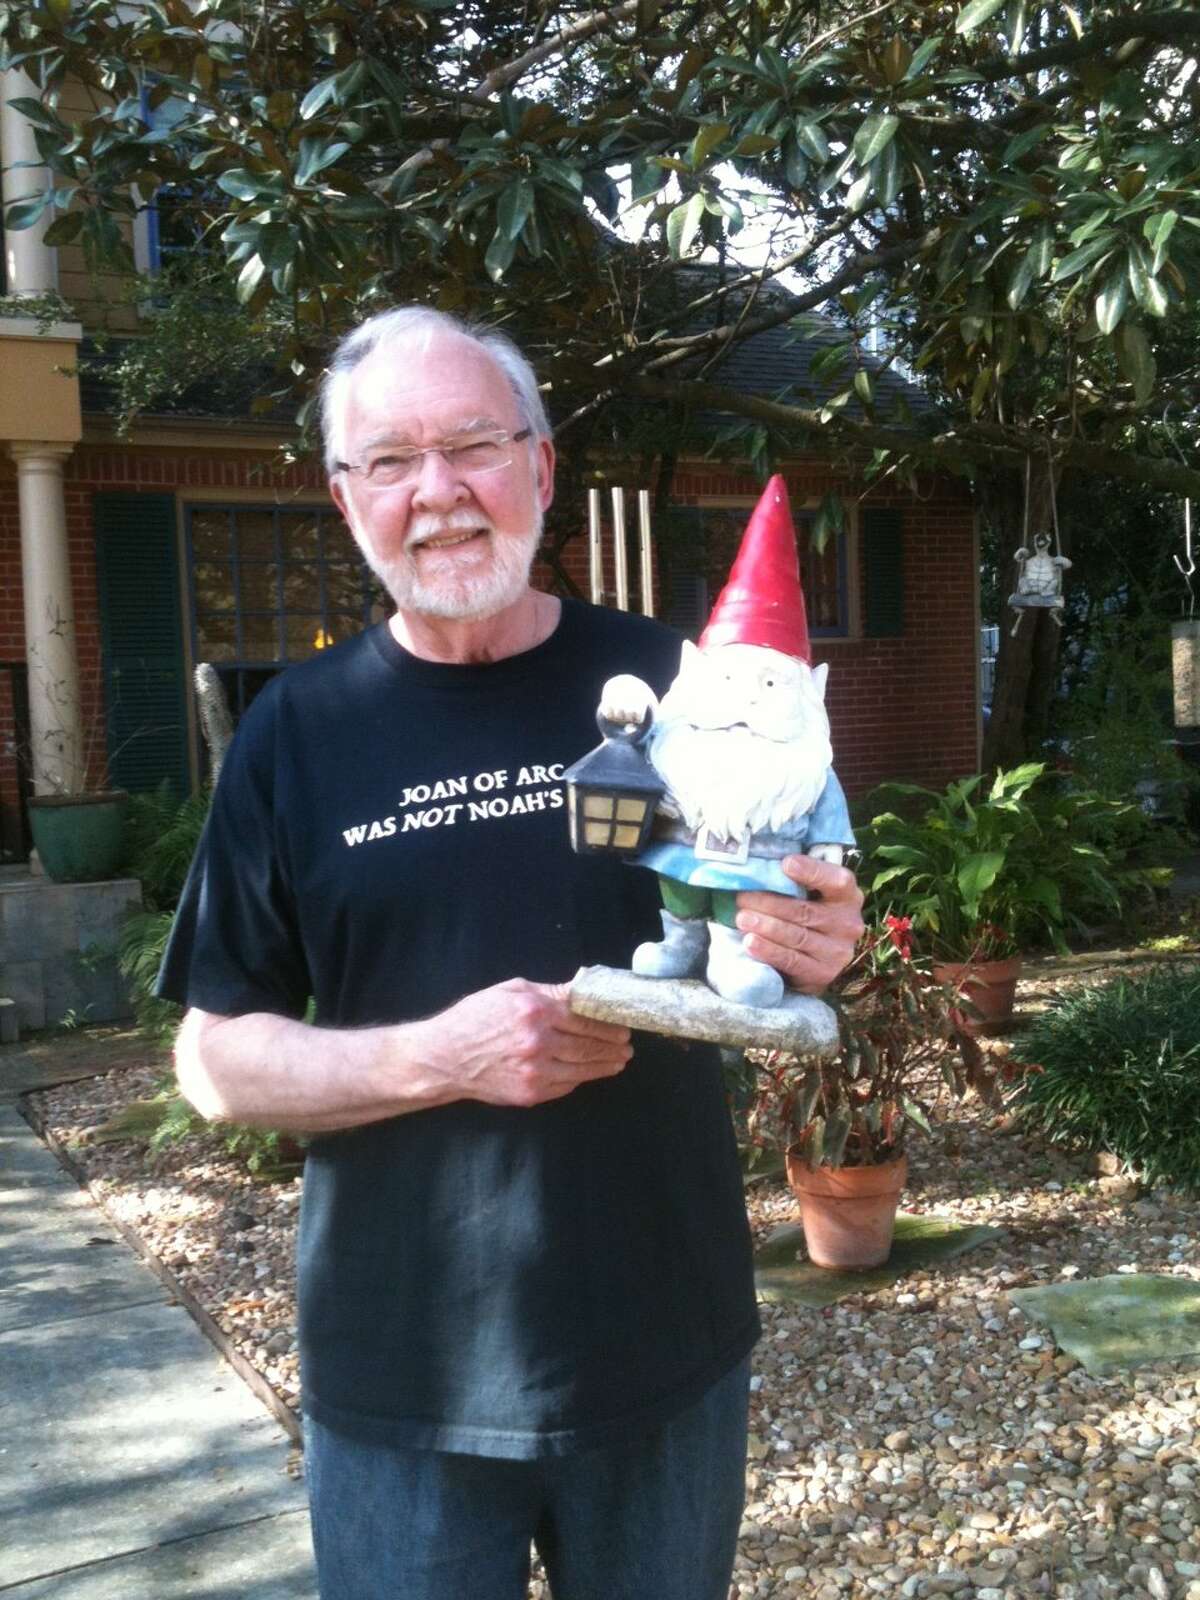 Use this photo of Bill Kerley, a contributor to "Jokes on Us."